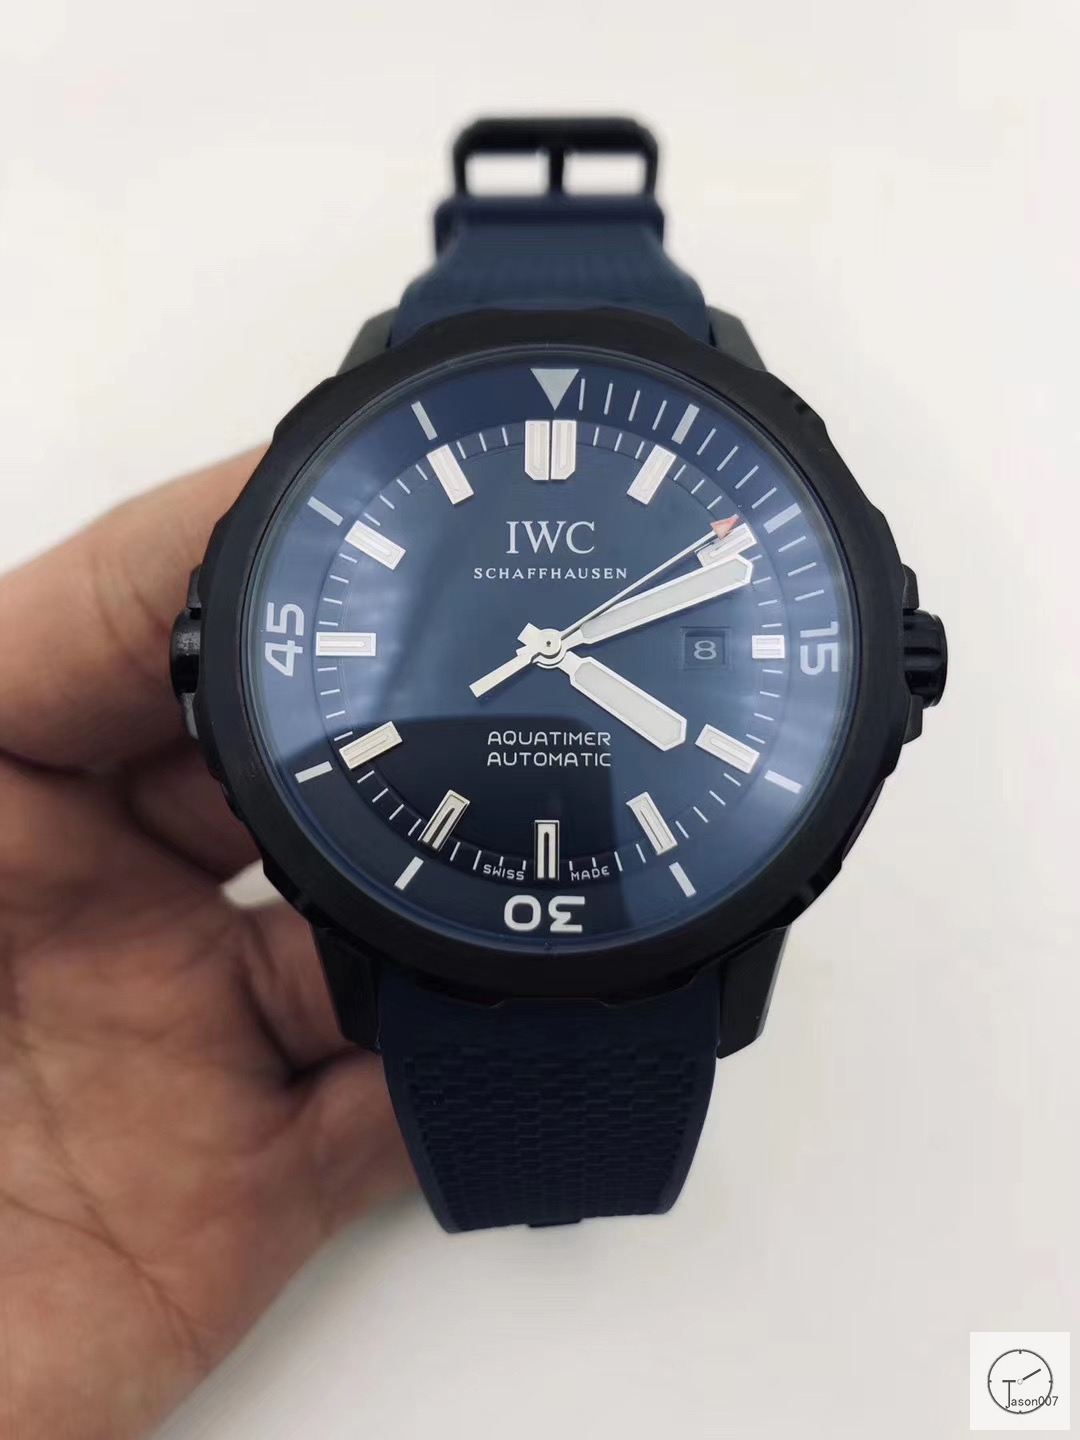 IWC AQUATIMER AUTOMATIC Mechical IW329001 42MM BLACK DIAL PVD Case Rubber Strap Mens Wristwatches ICW22060560